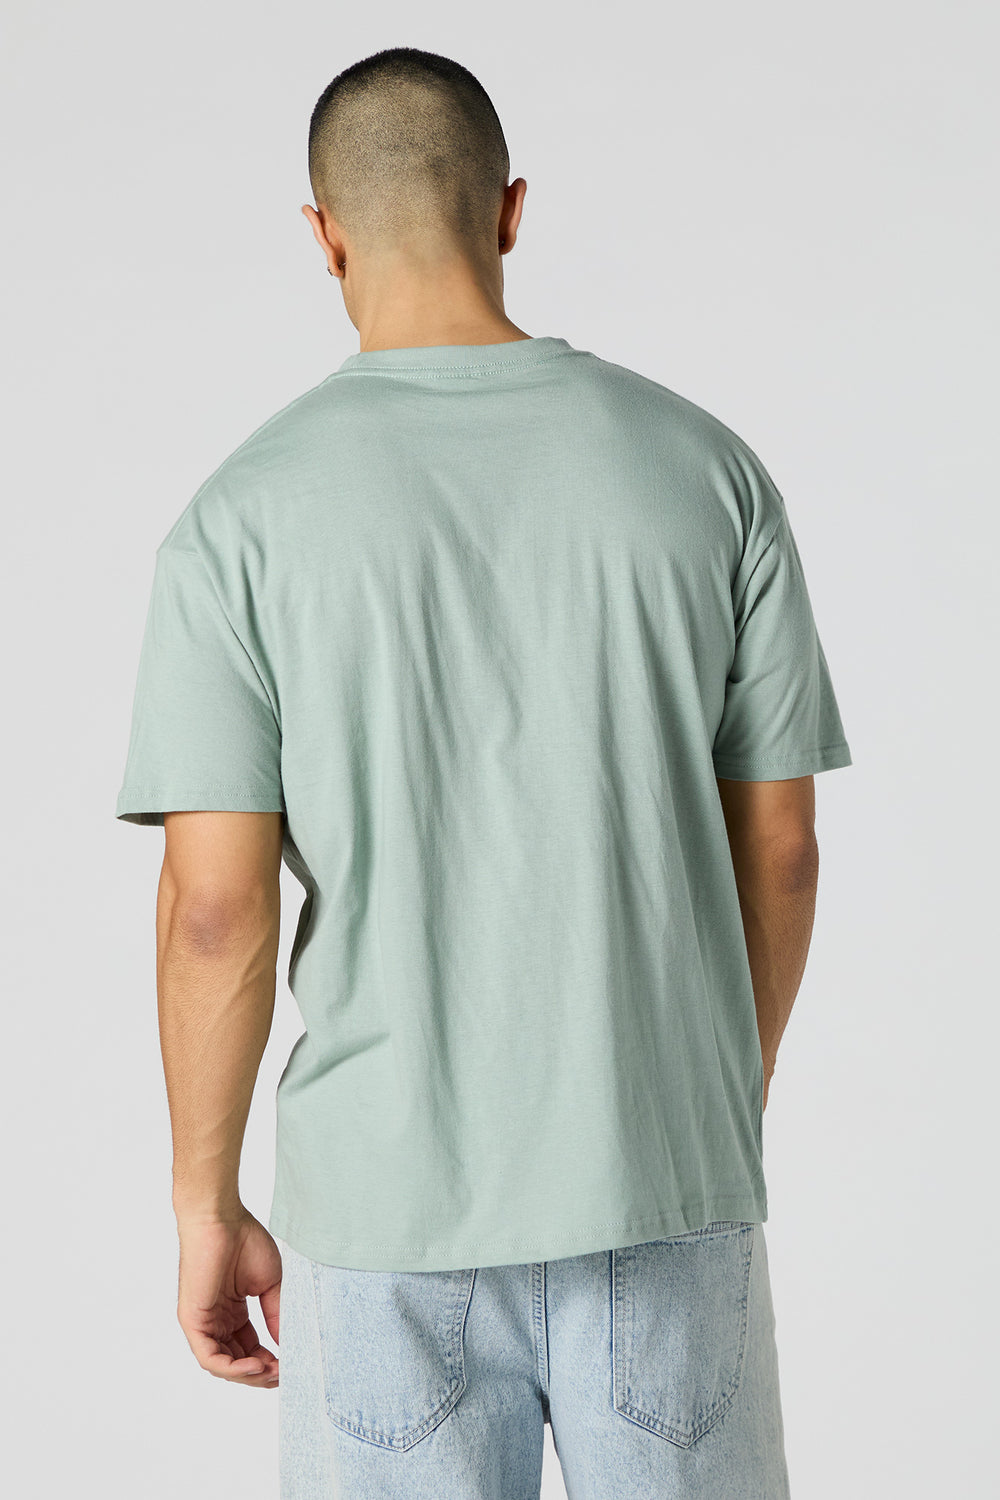 Solid Relaxed Crewneck T-Shirt Solid Relaxed Crewneck T-Shirt 2